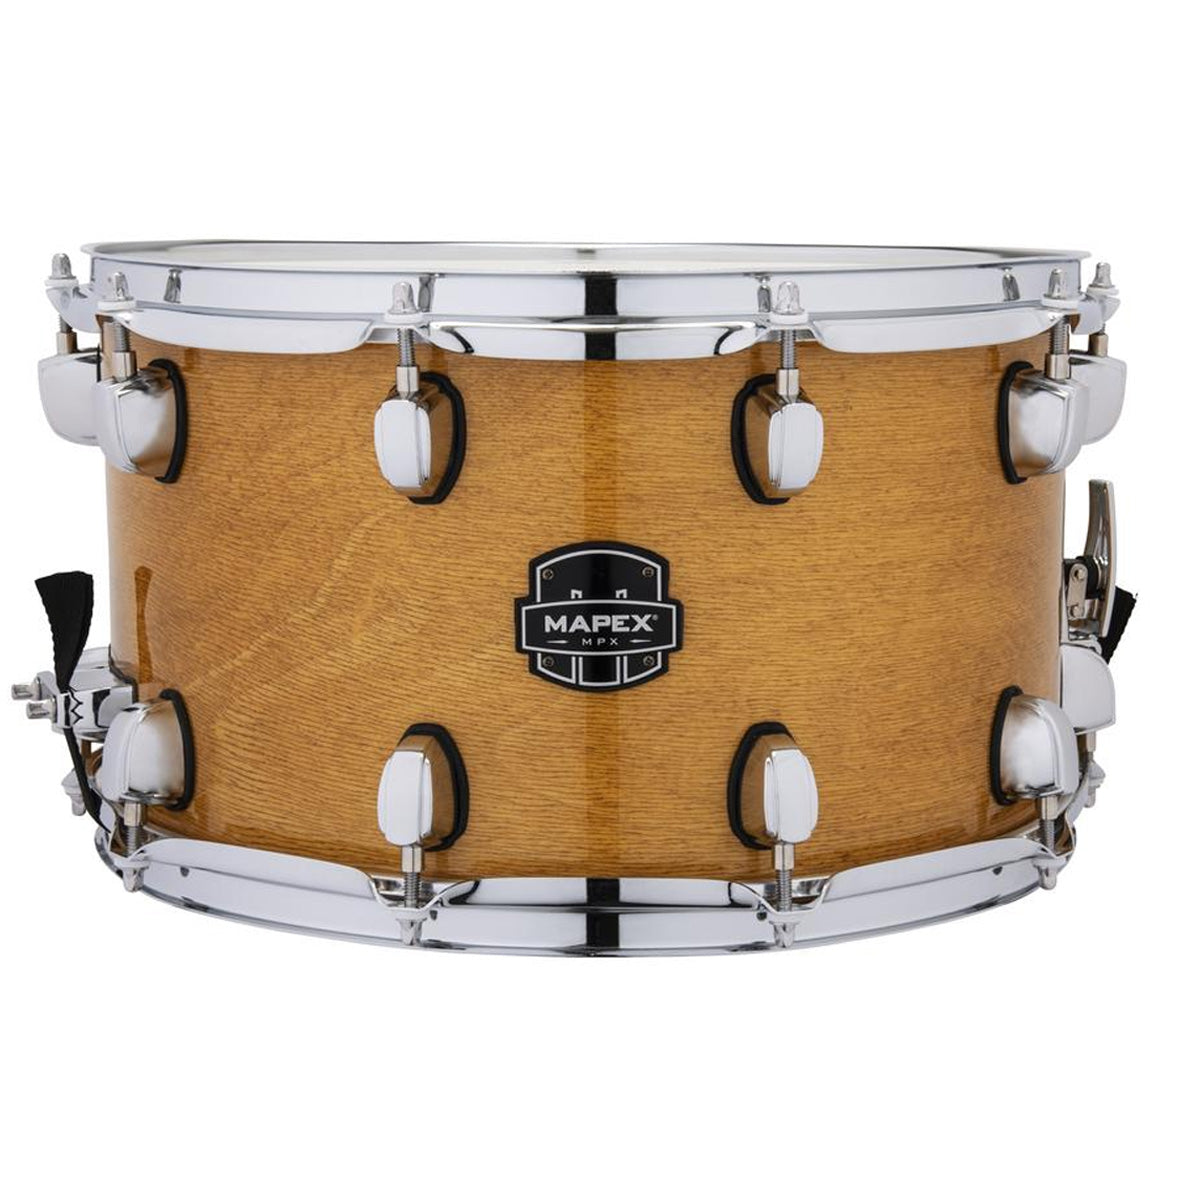 Mapex MPX 14"x8" Hybrid Shell Snare Drum in Natural